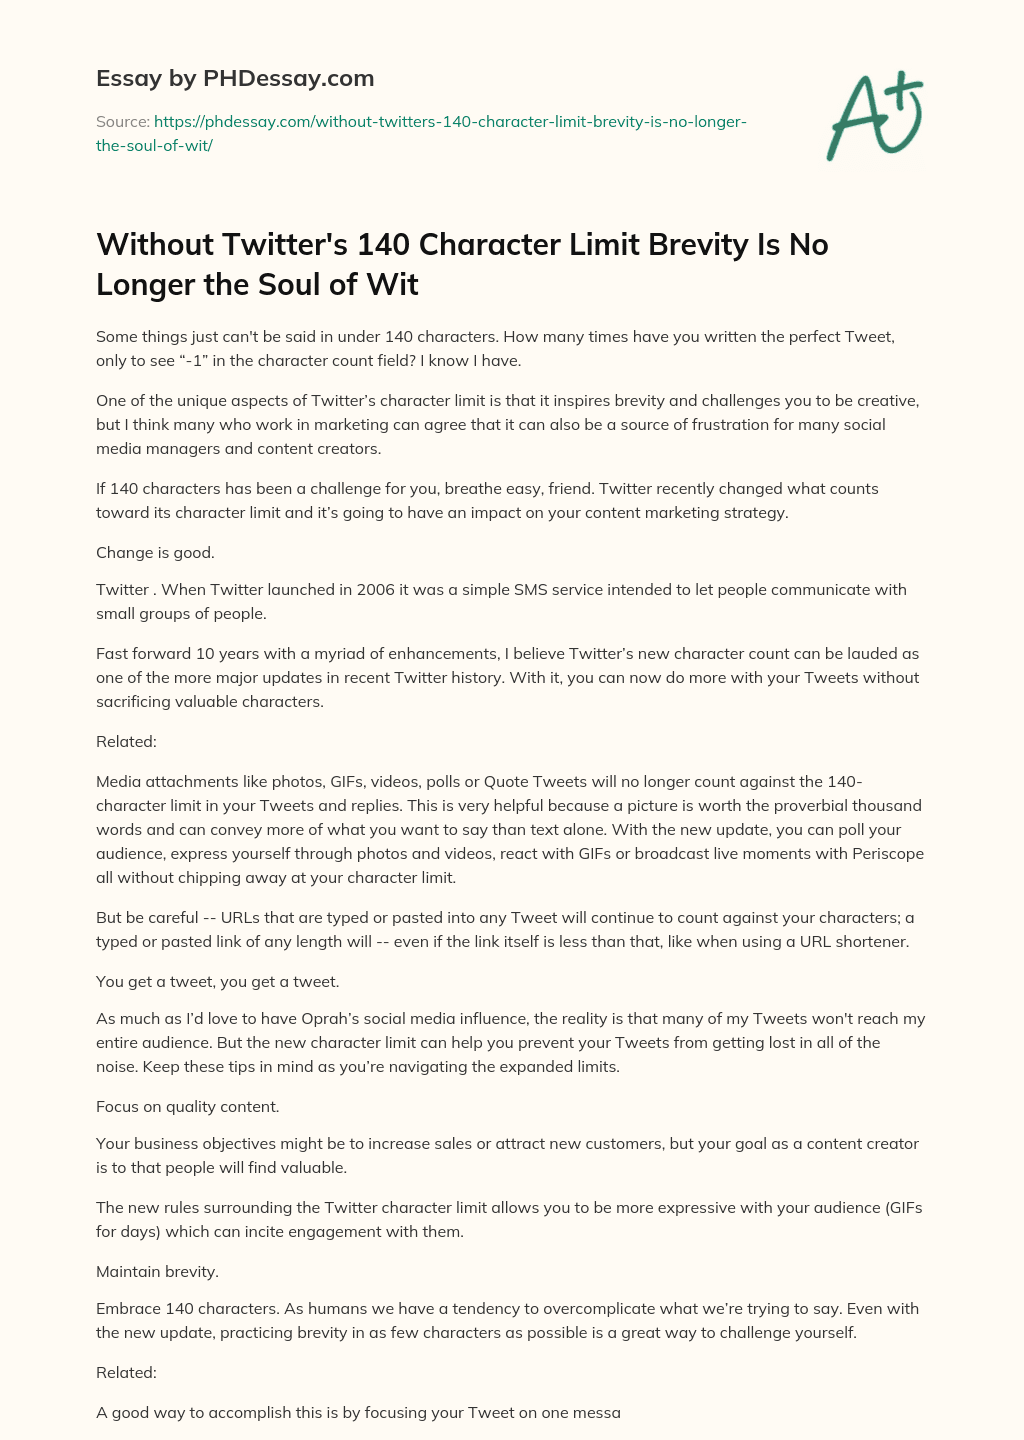 Without Twitter’s 140 Character Limit Brevity Is No Longer the Soul of Wit essay